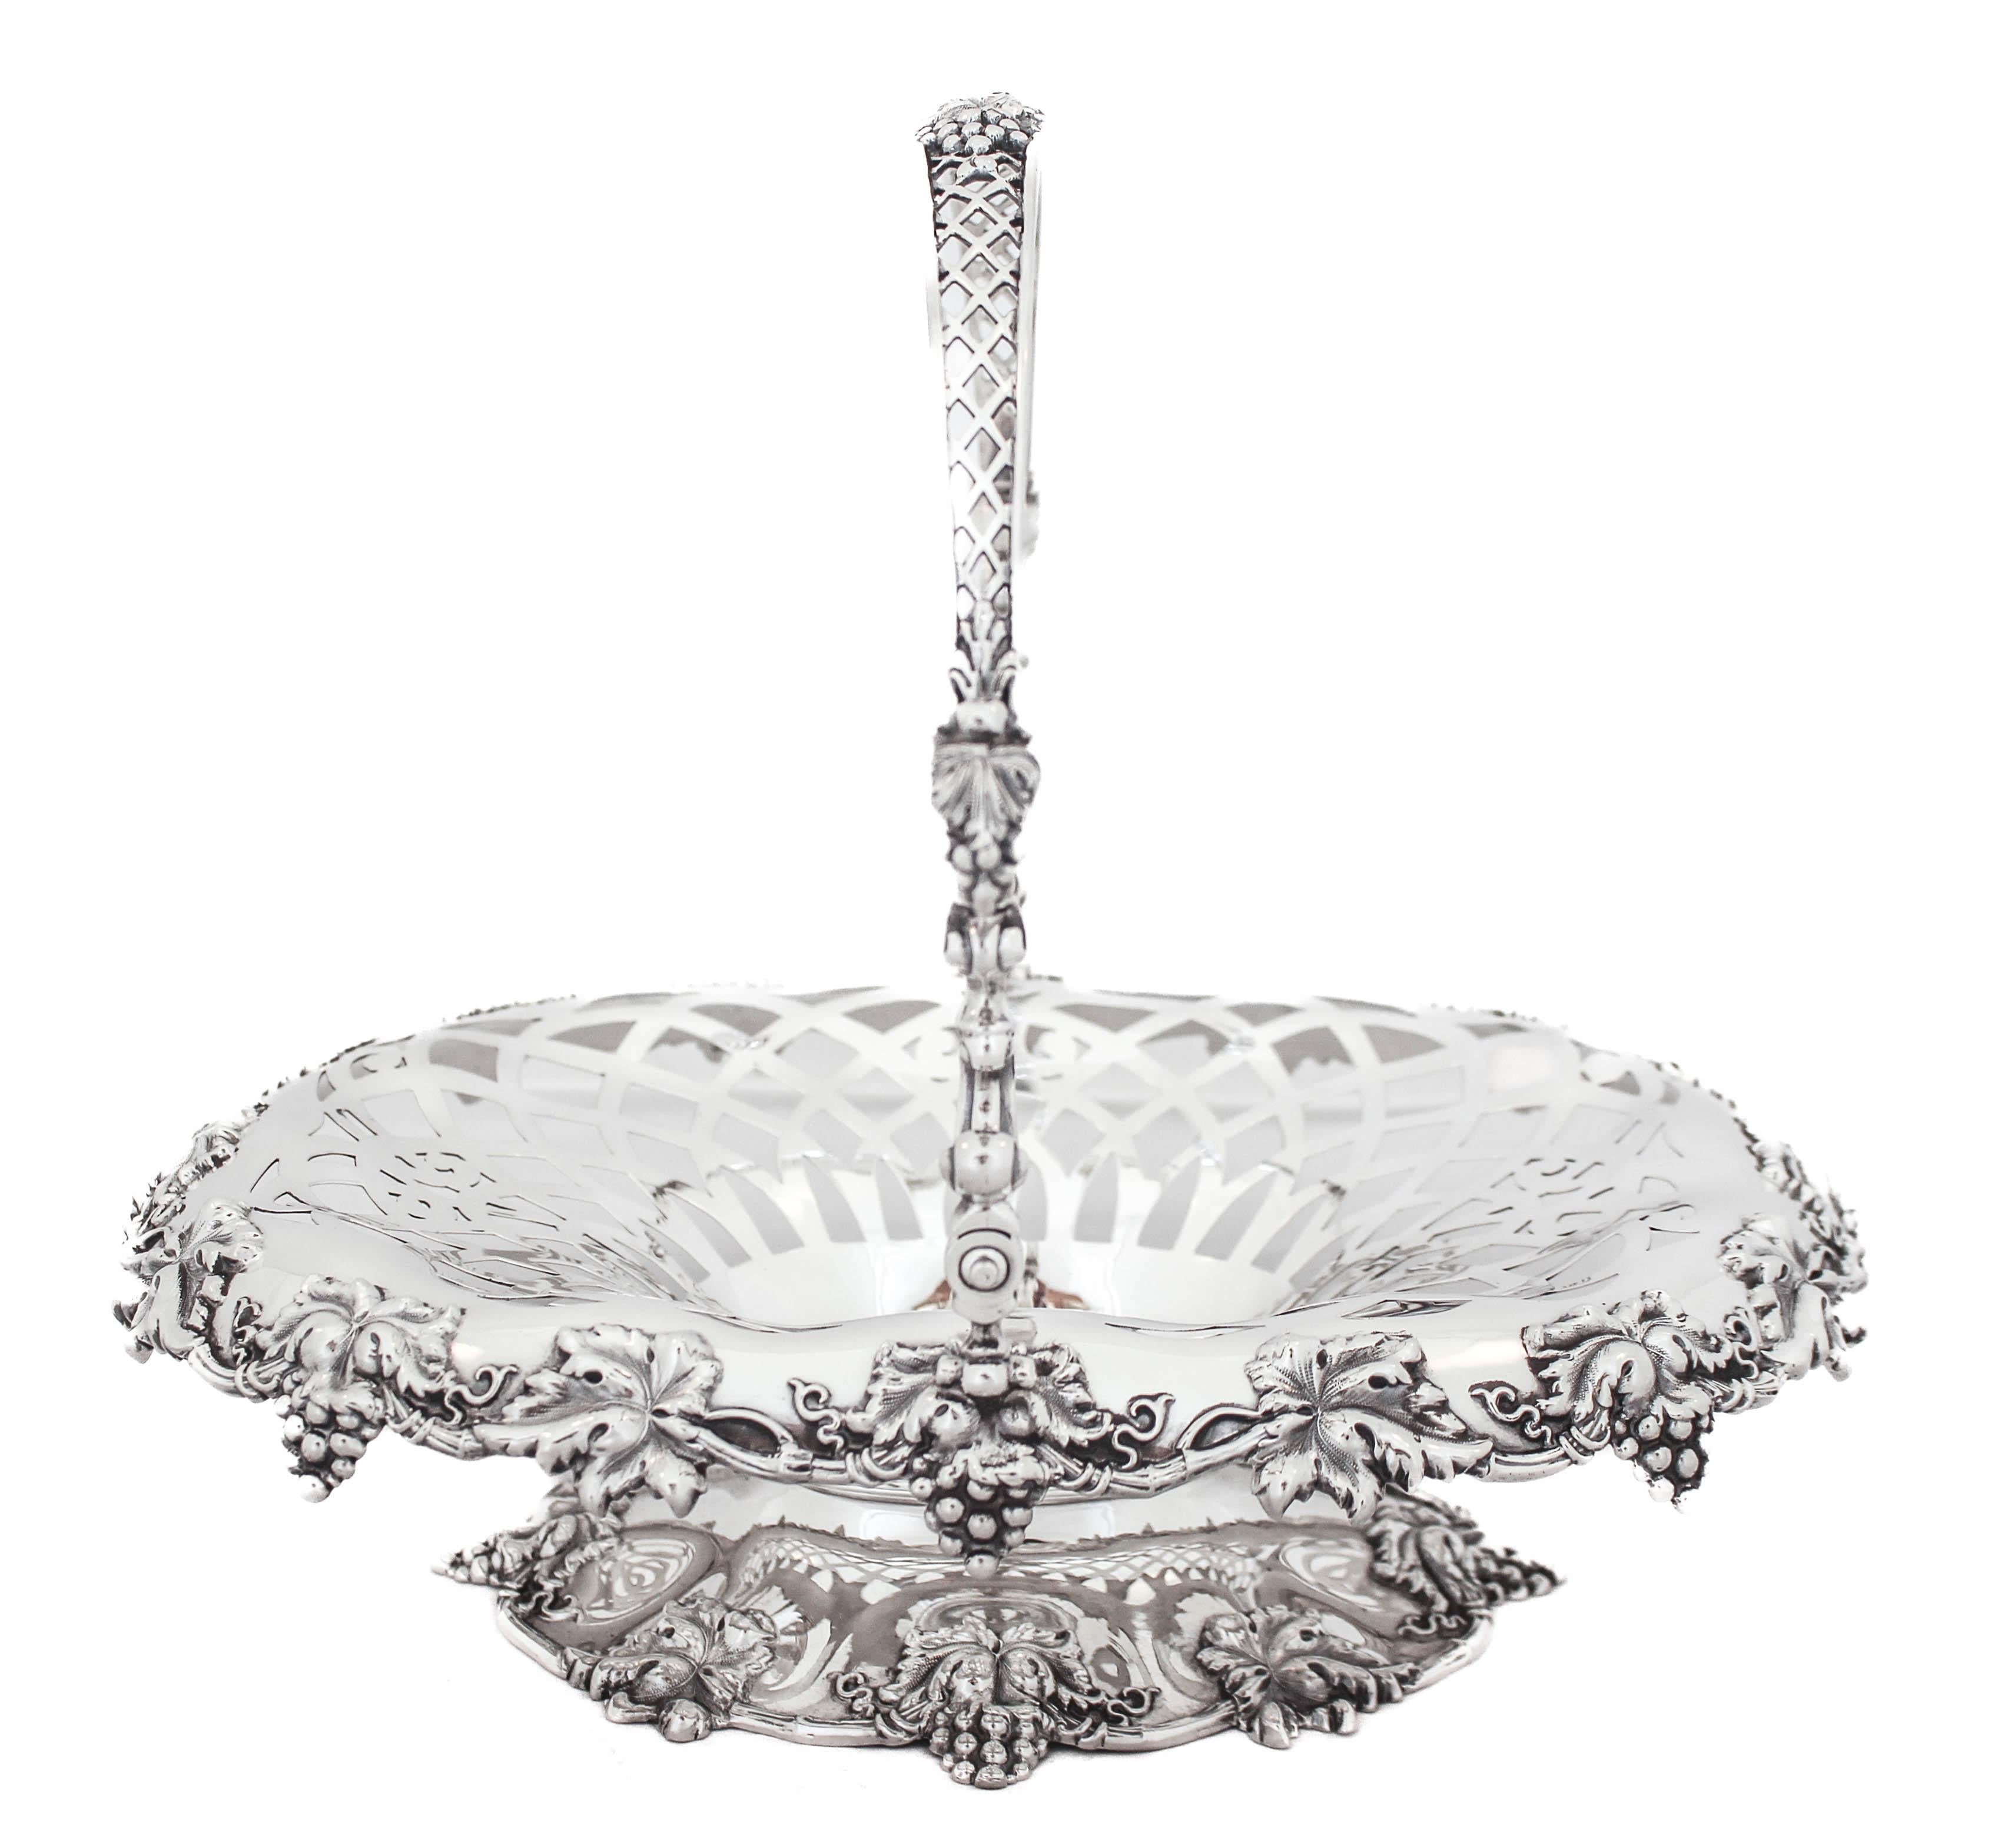 Being offered is a sterling silver basket by William Durgin Silver.  It has clusters of grapes and leaves hanging off the rim and along the base.  The sides of the basket are reticulated in a geometric arrangement.  The handle has both designs;